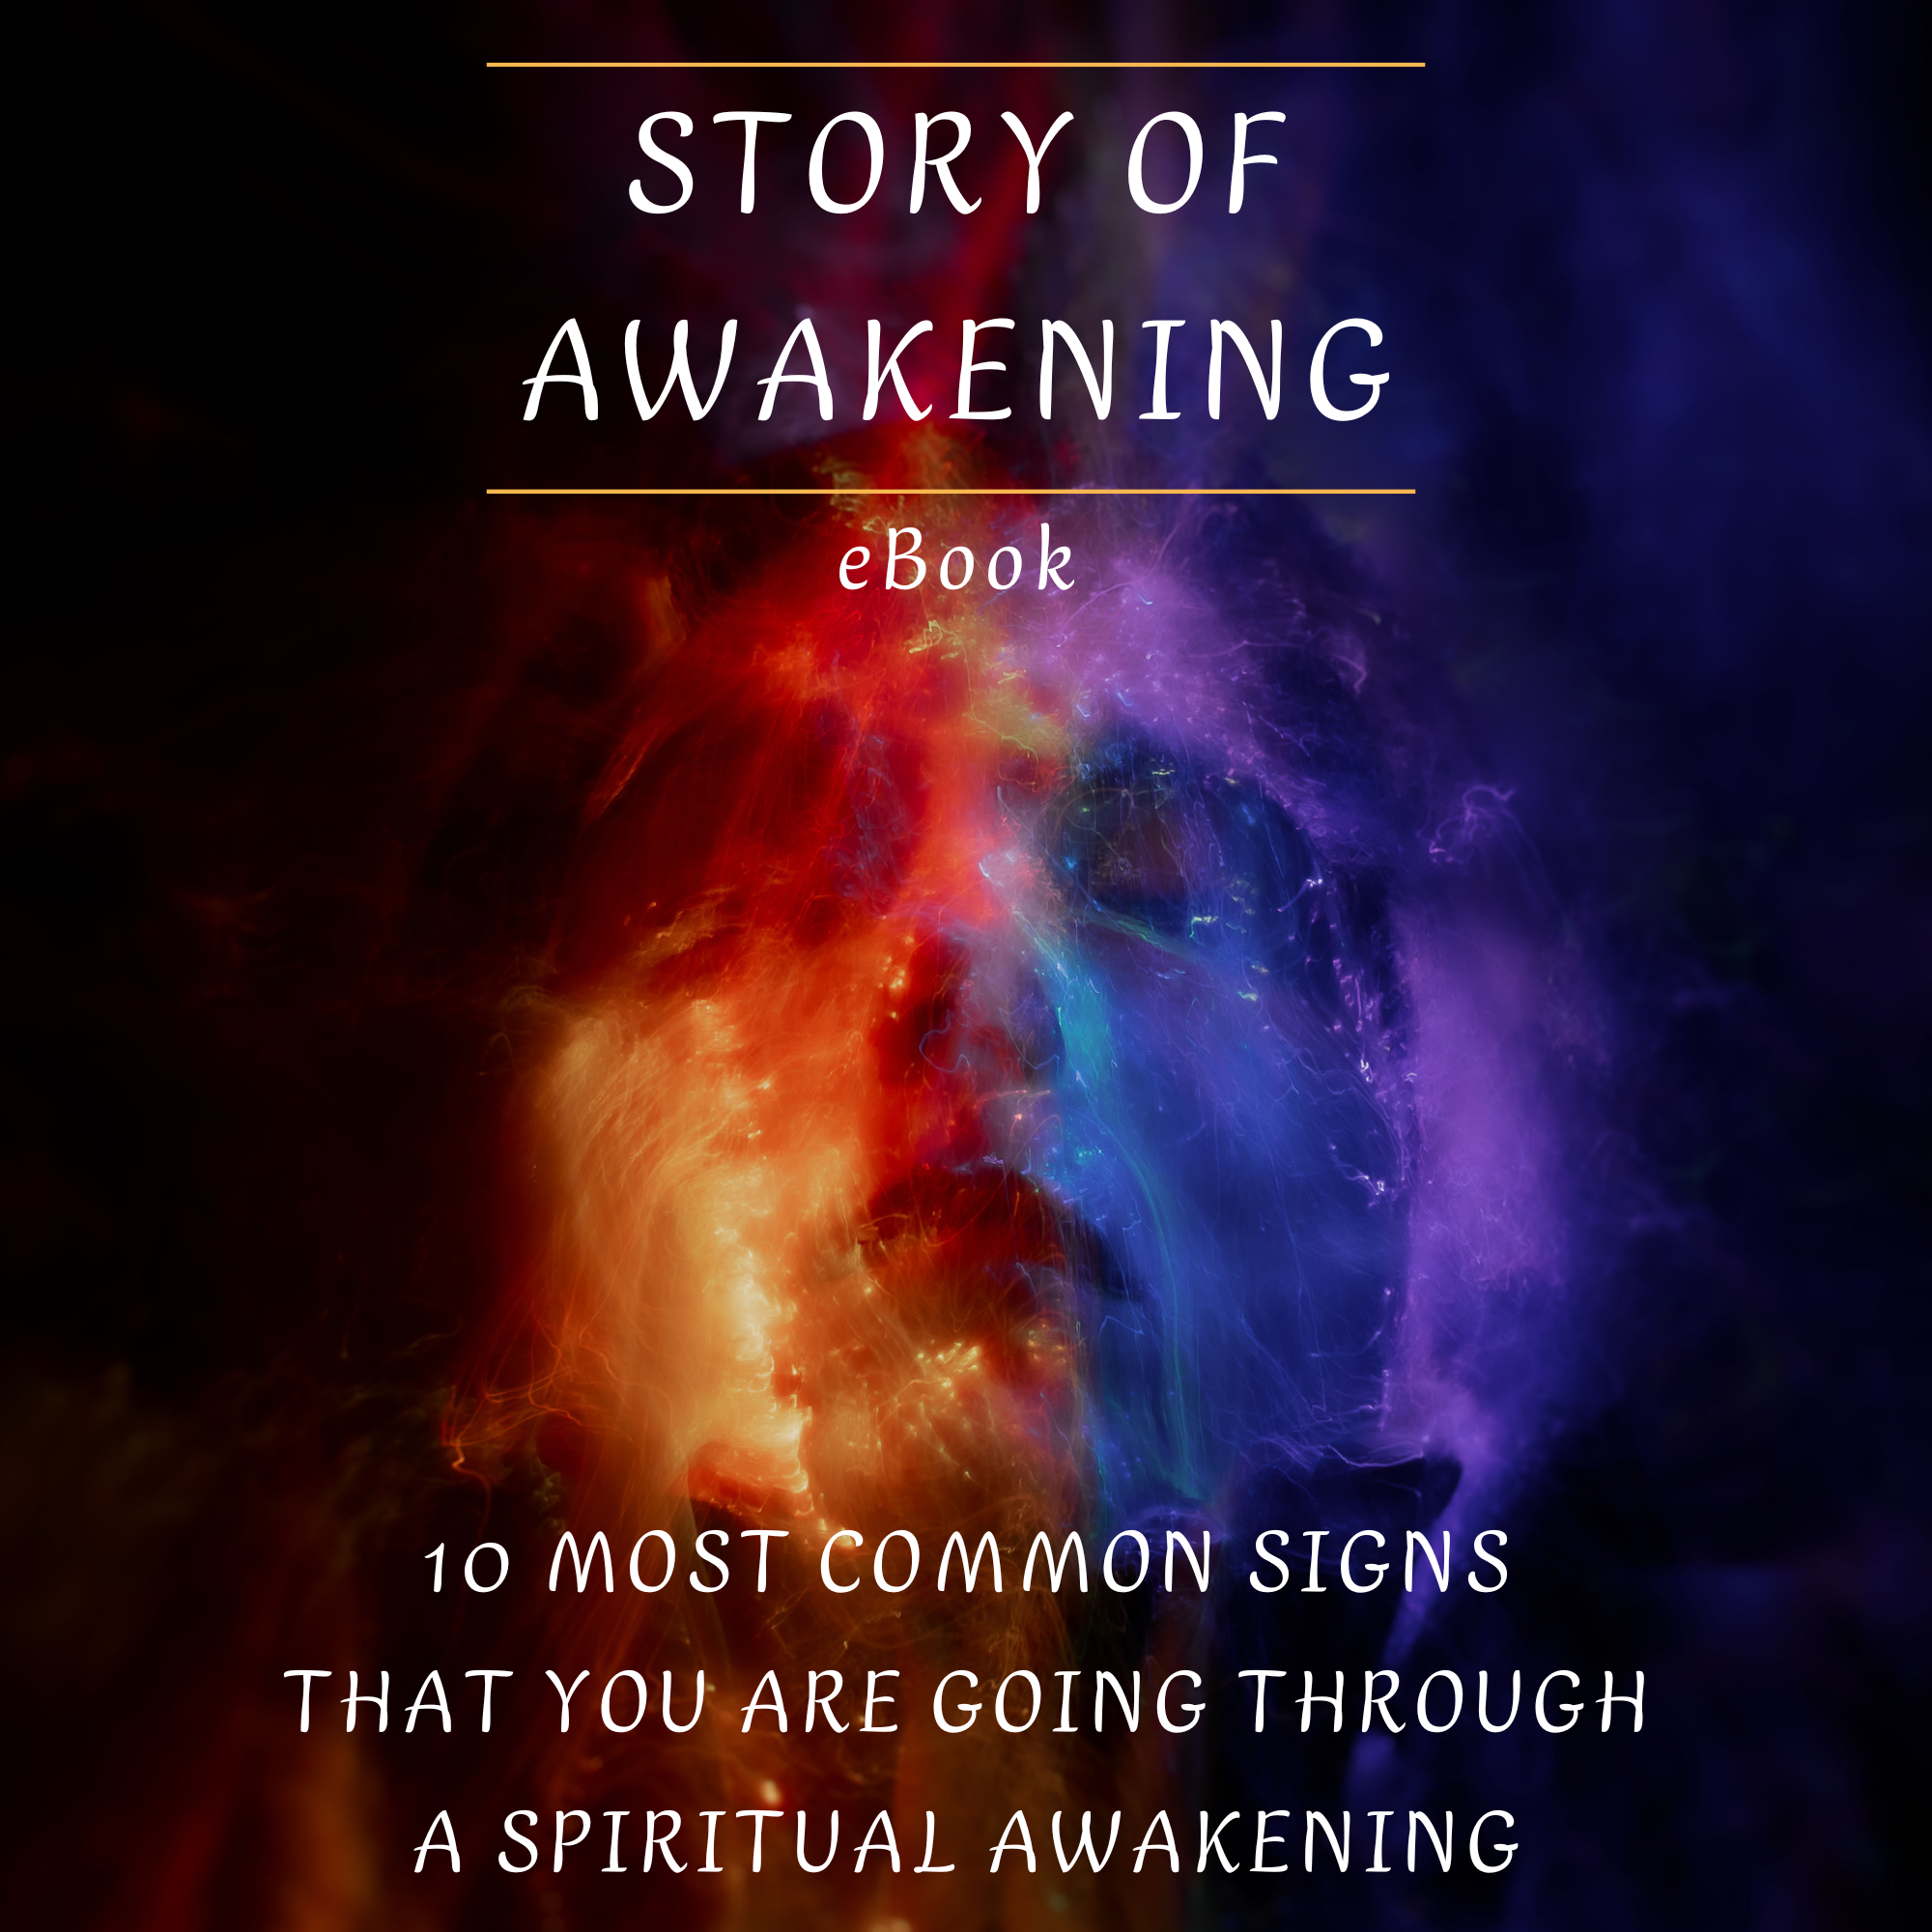 Story of Awakening 10 most common signs that you are going through a spiritual awakening ebook